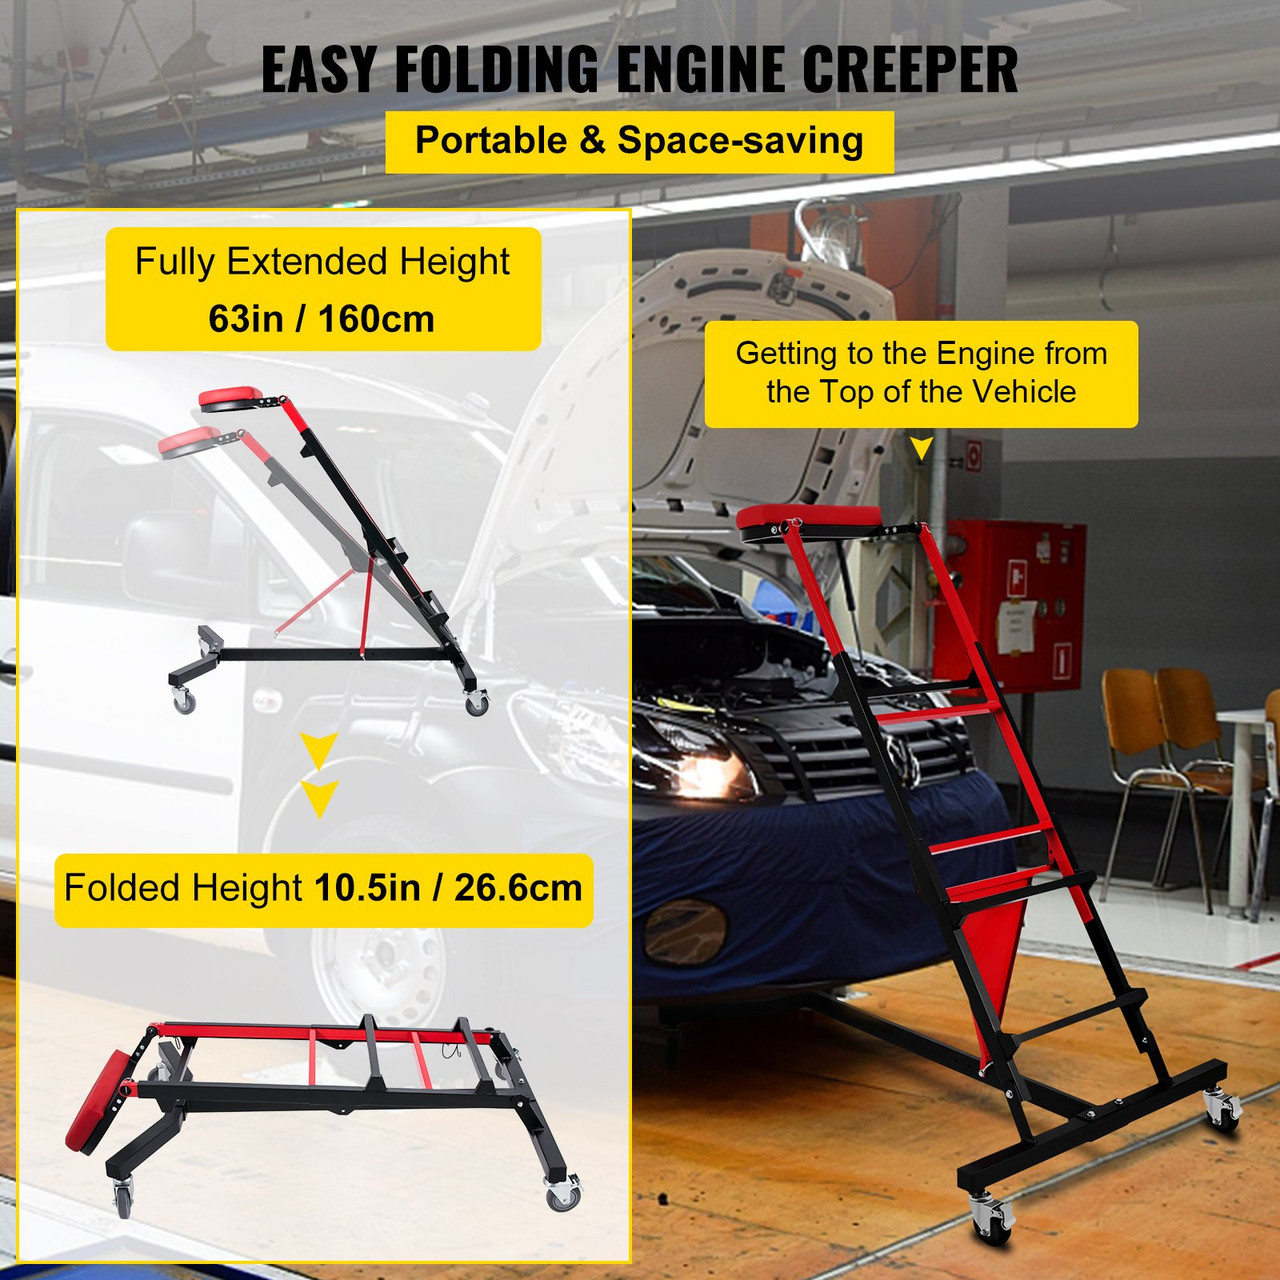 Automotive Engine Creeper, Adjustable Height Foldable Creeper, 400 LBS Capacity High Top Engine Creeper, with Four 4 inches Casters, Padded Deck, for Home, Garage, Workshop Repair Maintenance